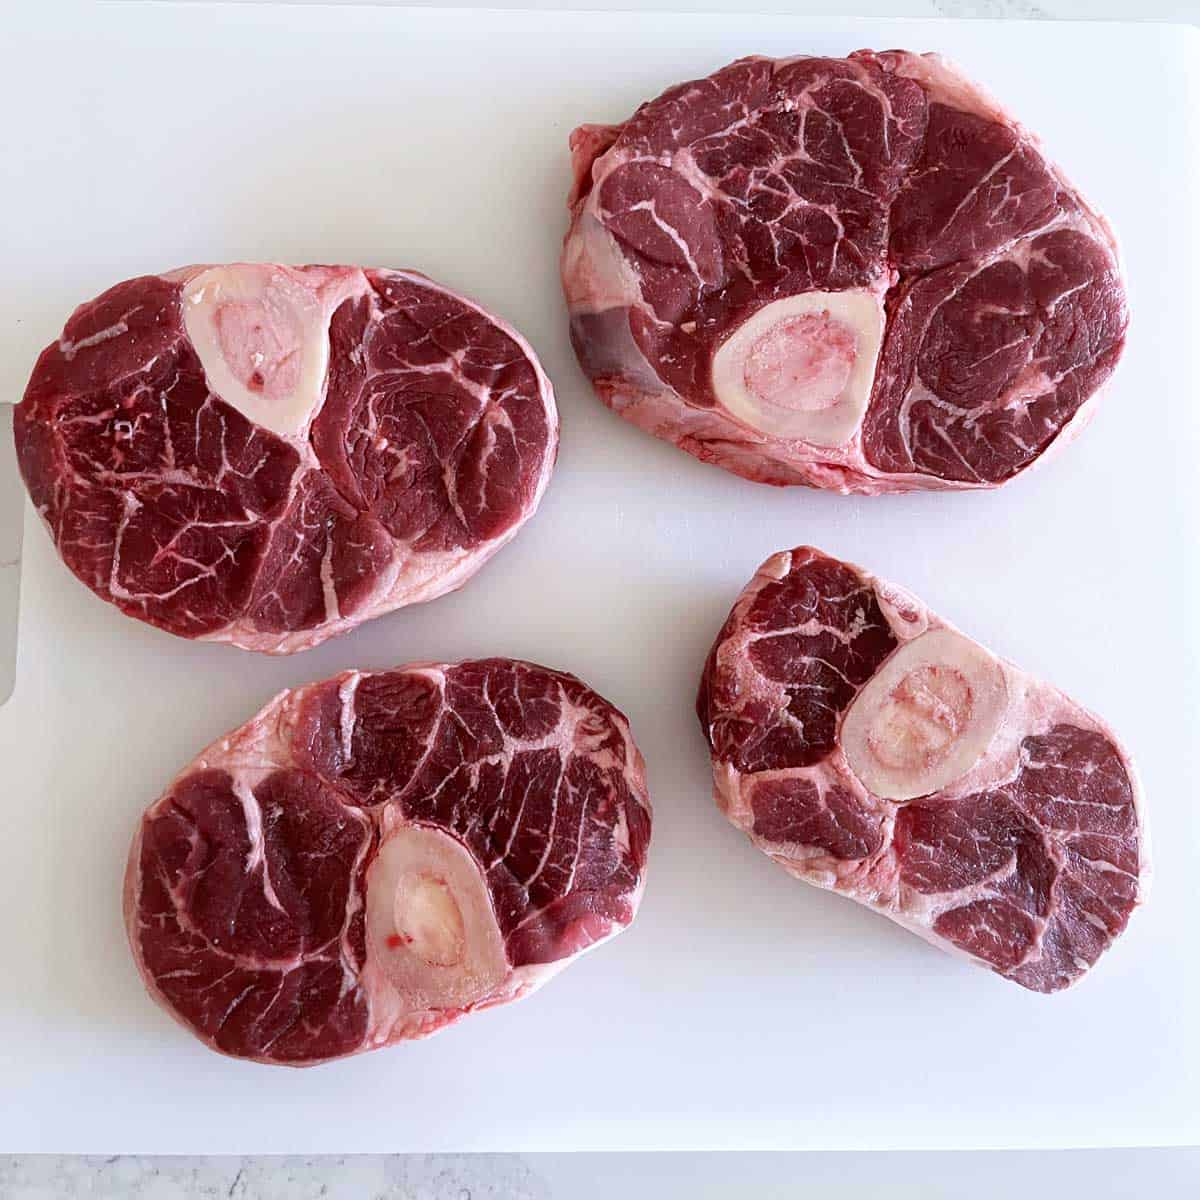 Beef shanks that come in different sizes. 